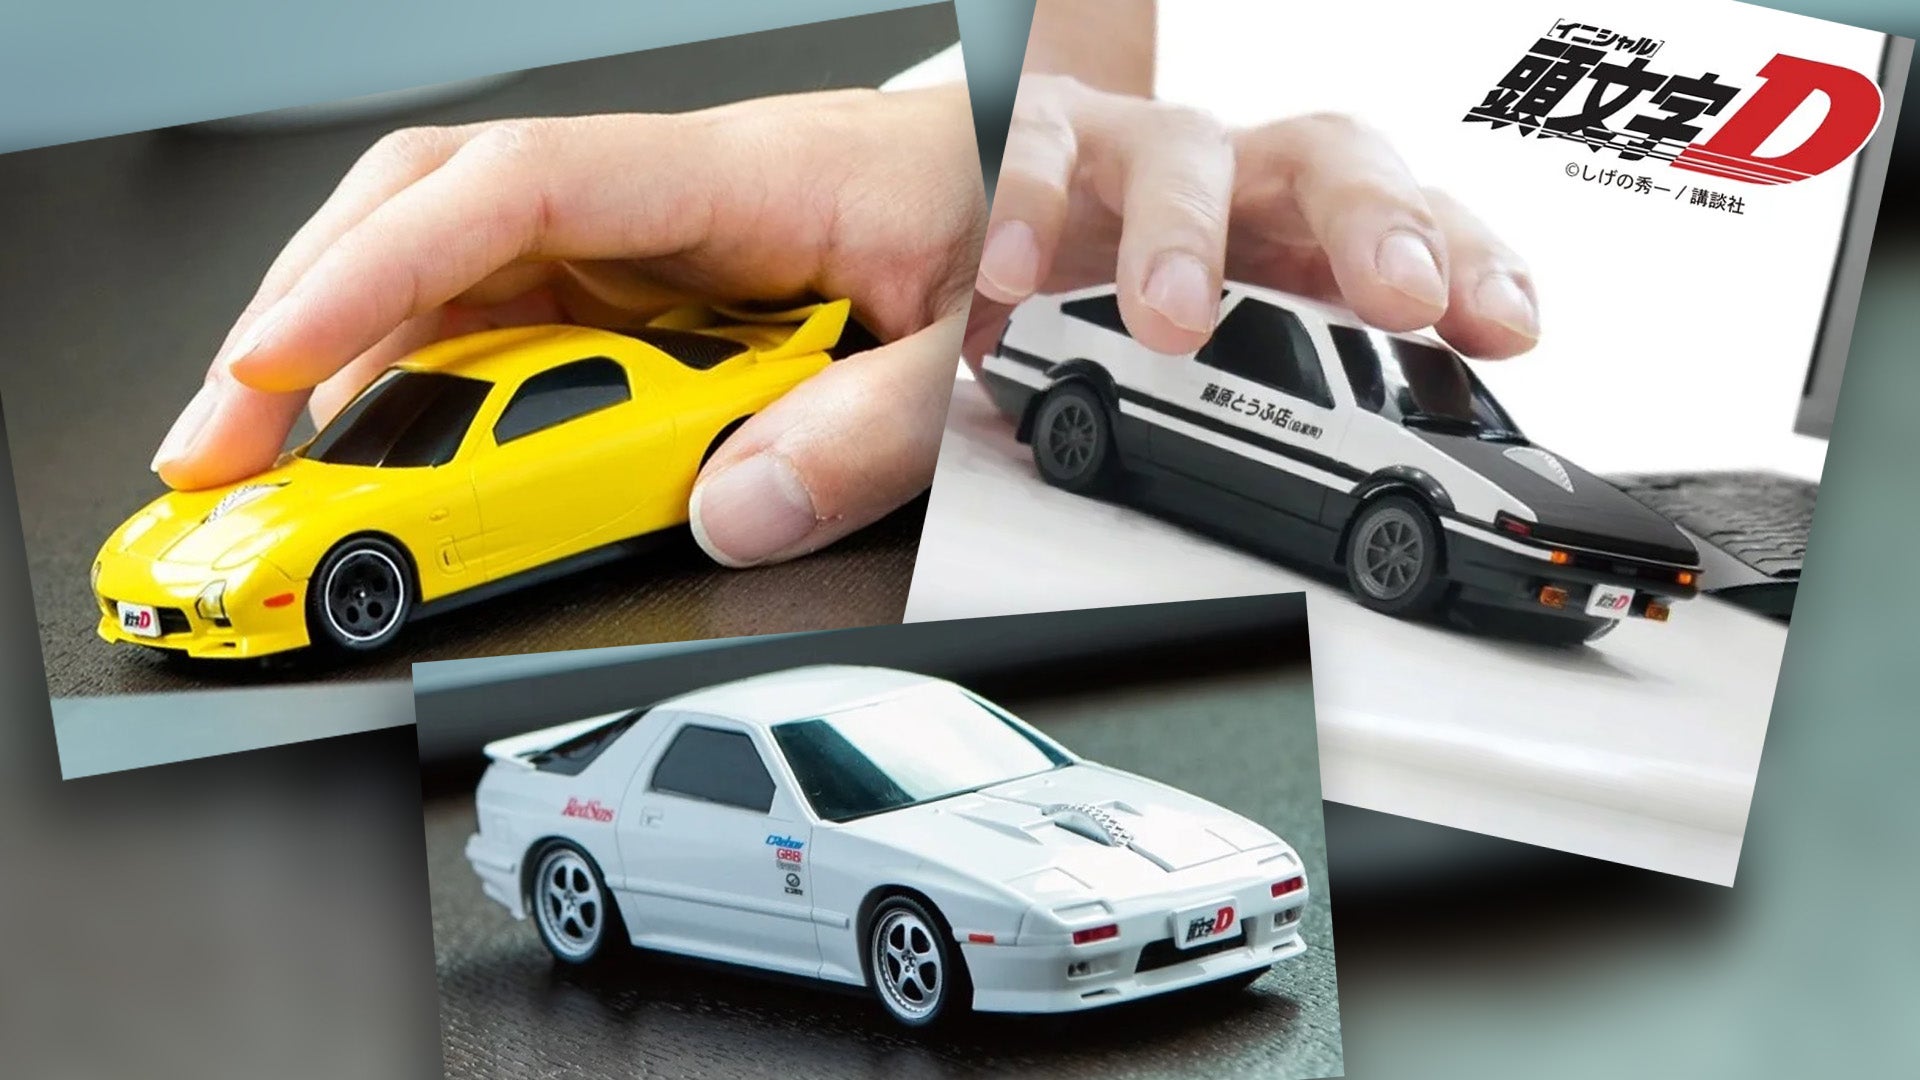 These initial D computer mice are designed for drifting on desktops.